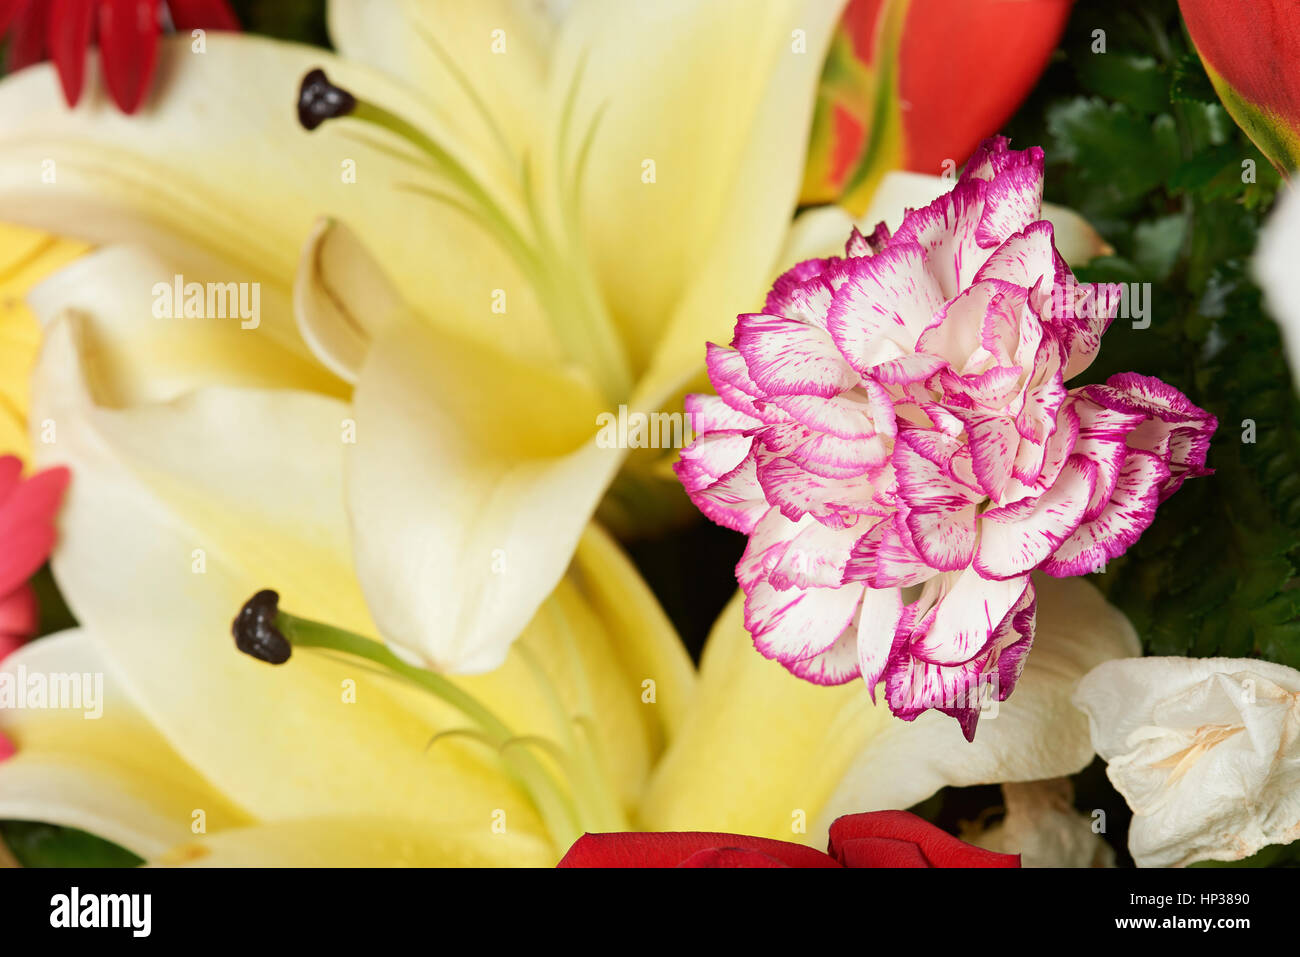 Purple carnation flower clsoe up in exotic colourful background Stock Photo